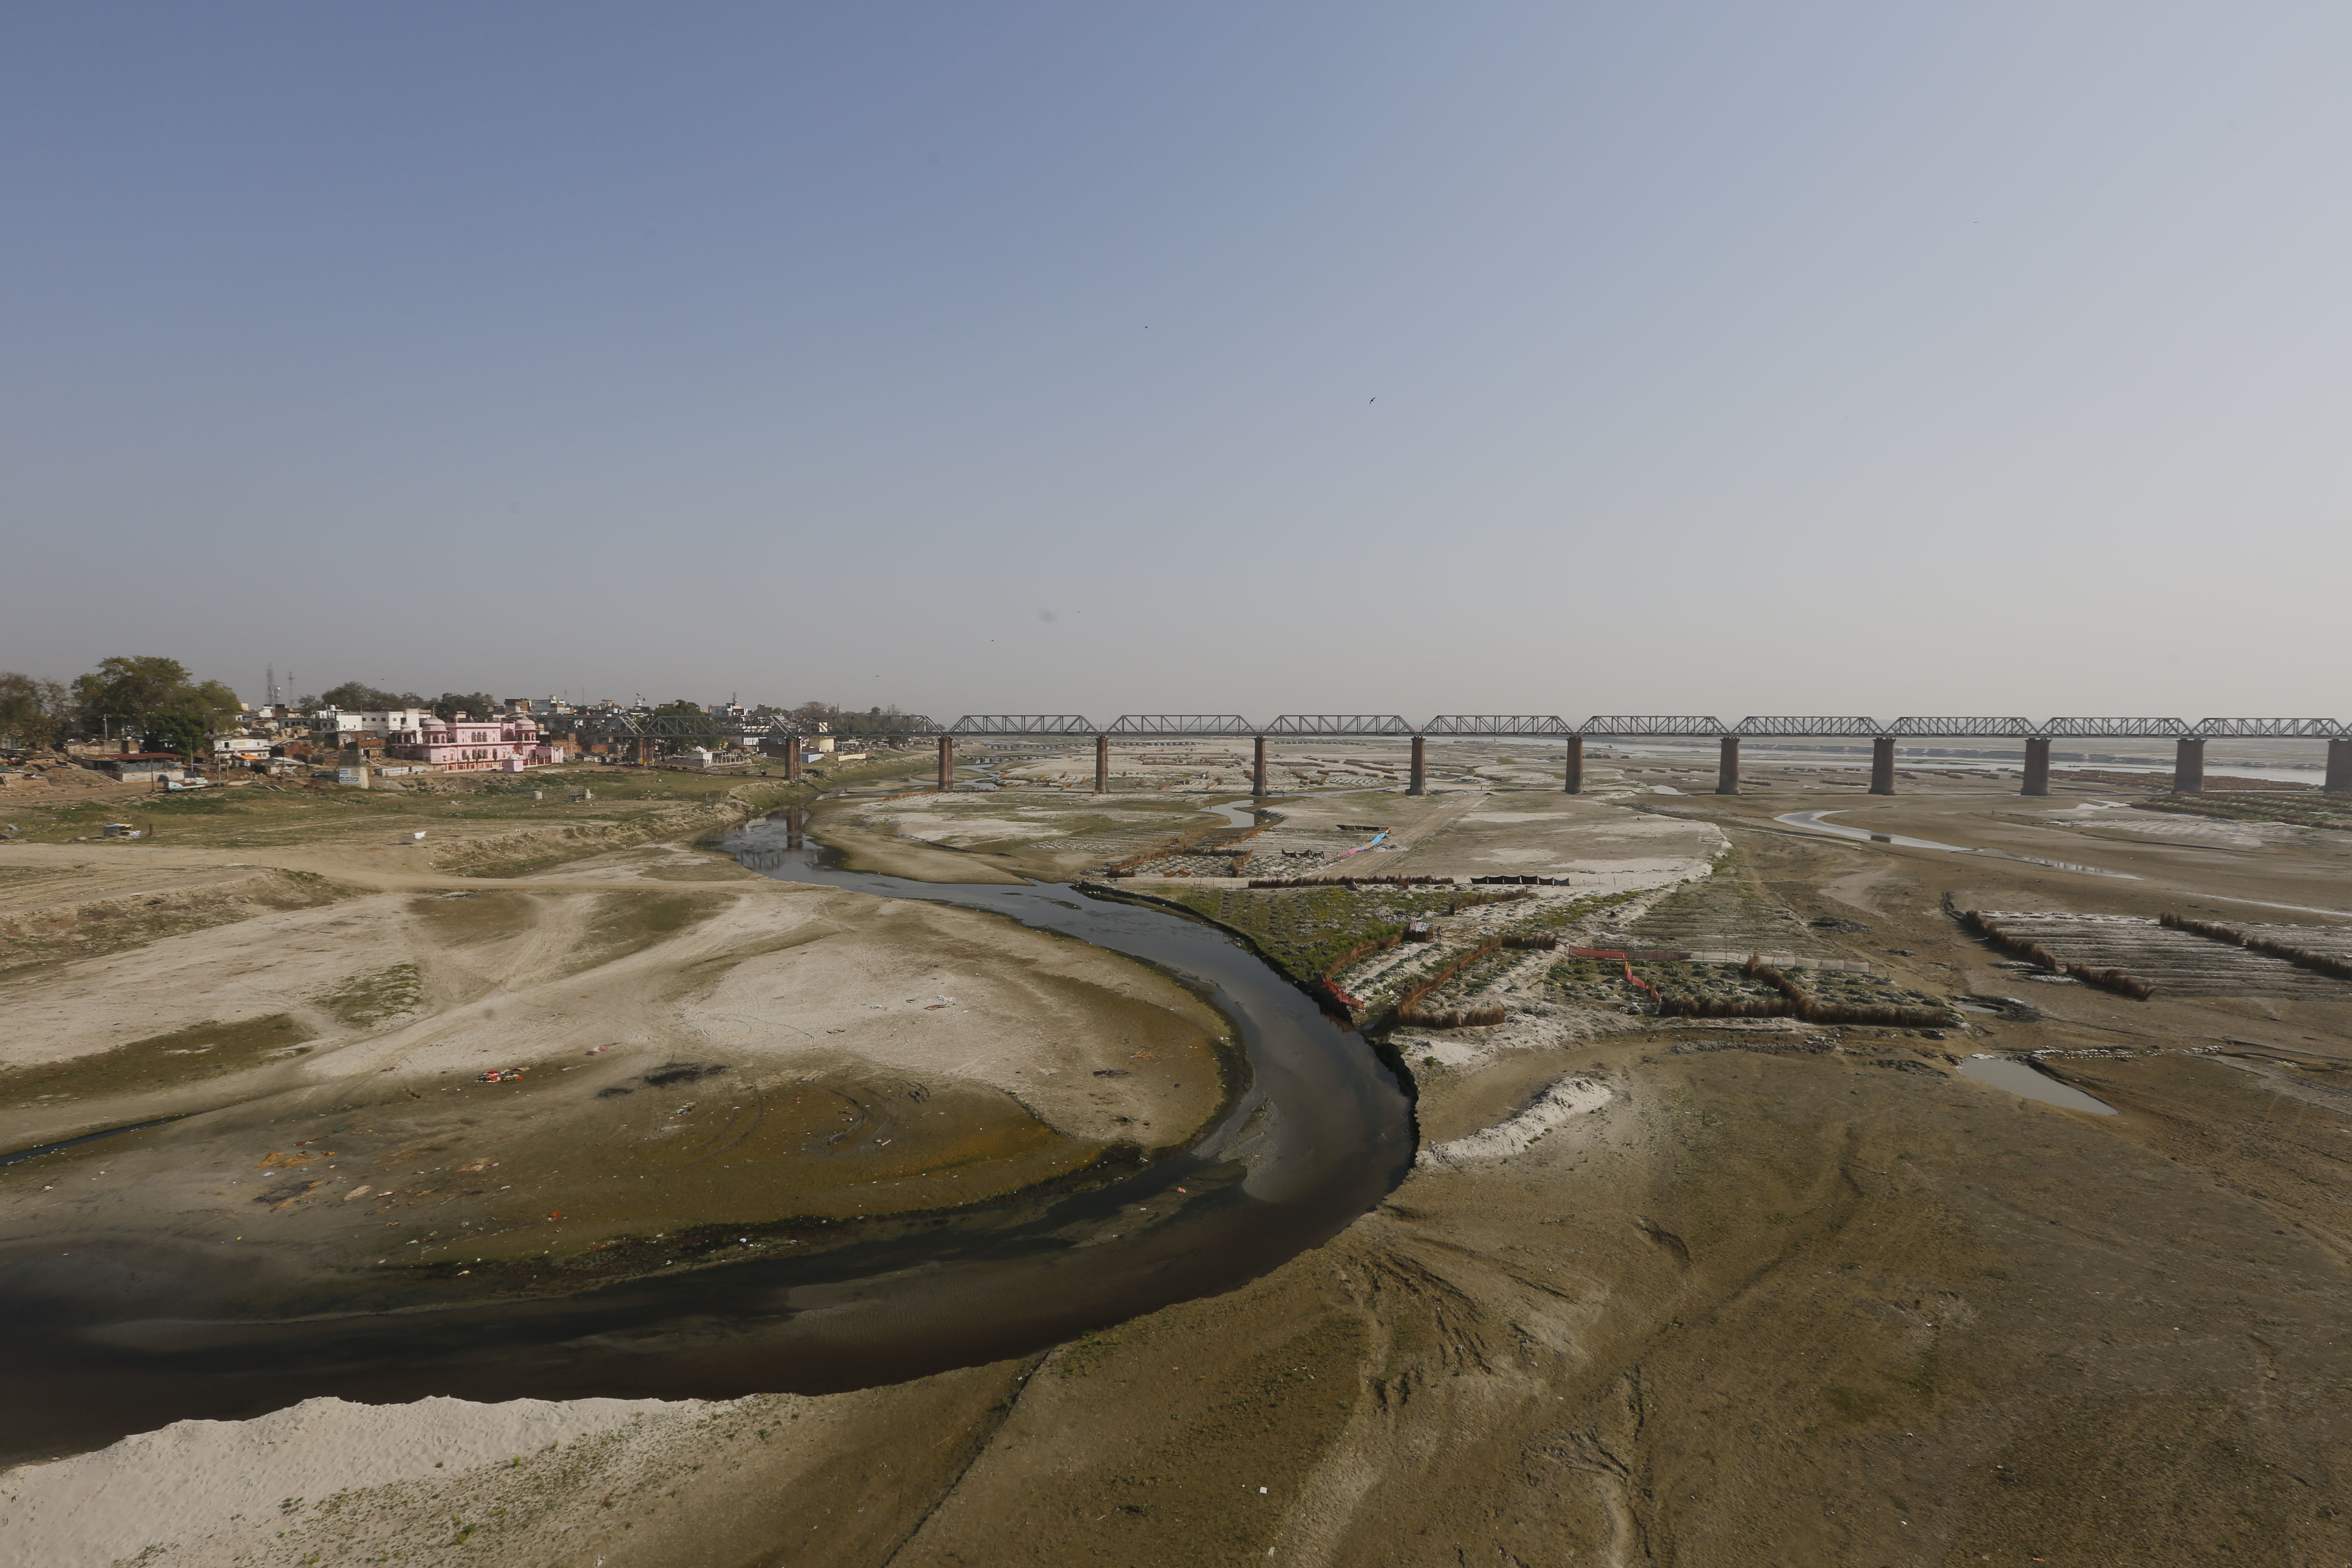 A view of a portion of the Ganges River where water levels have receded on World Water Day in Allahabad, India, Wednesday, March 22, 2017.  Two of India's most iconic rivers, the Ganges and the Yamuna, considered sacred by nearly a billion Hindus in the country, have been given the status of living entities to save them from further harm caused by widespread pollution. (AP Photo/Rajesh Kumar Singh)